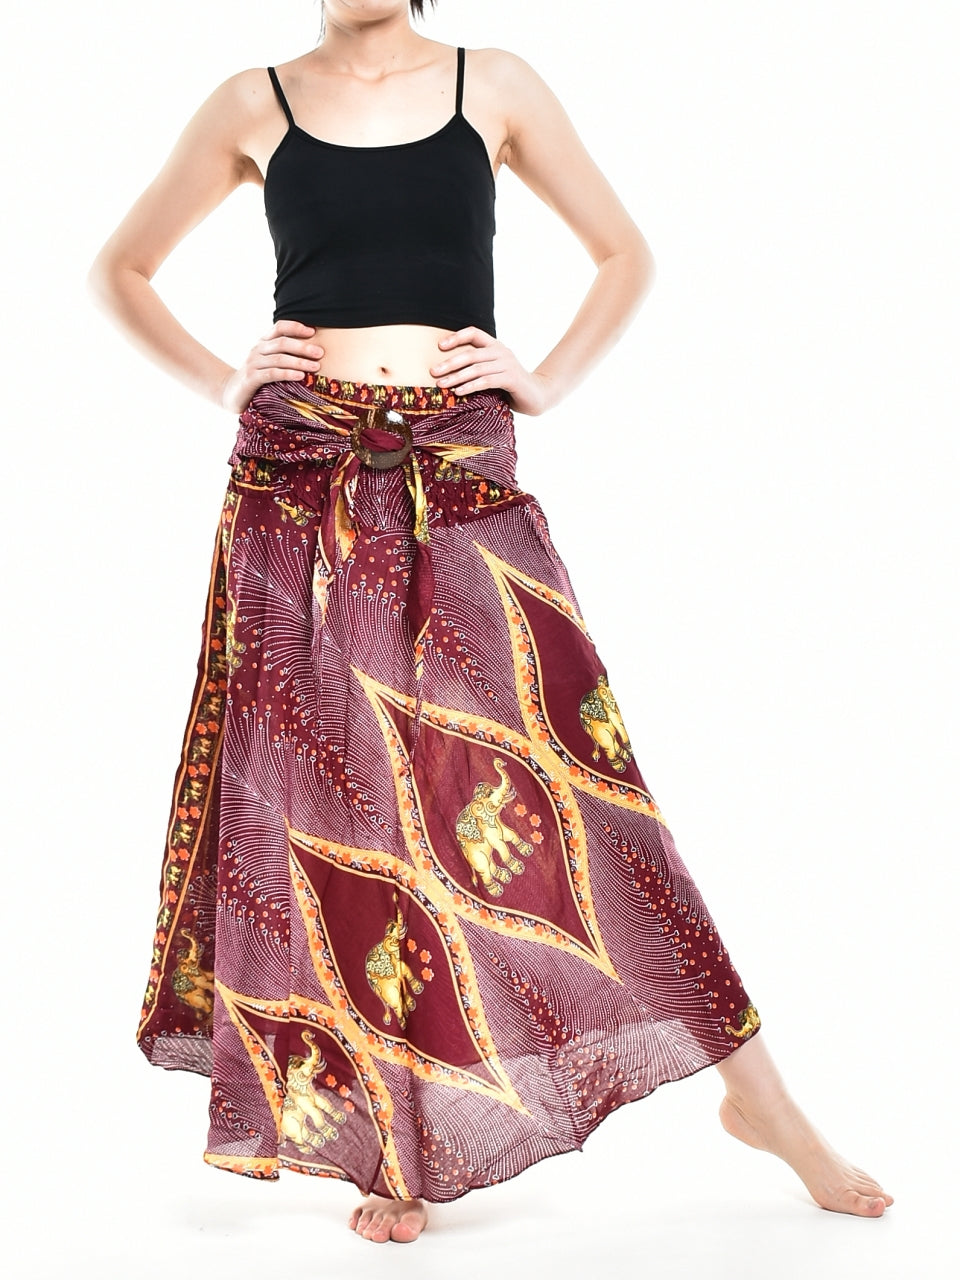 Bohotusk Red Elephant Diamond Long Skirt With Coconut Buckle (& Strapless Dress) S/M Only